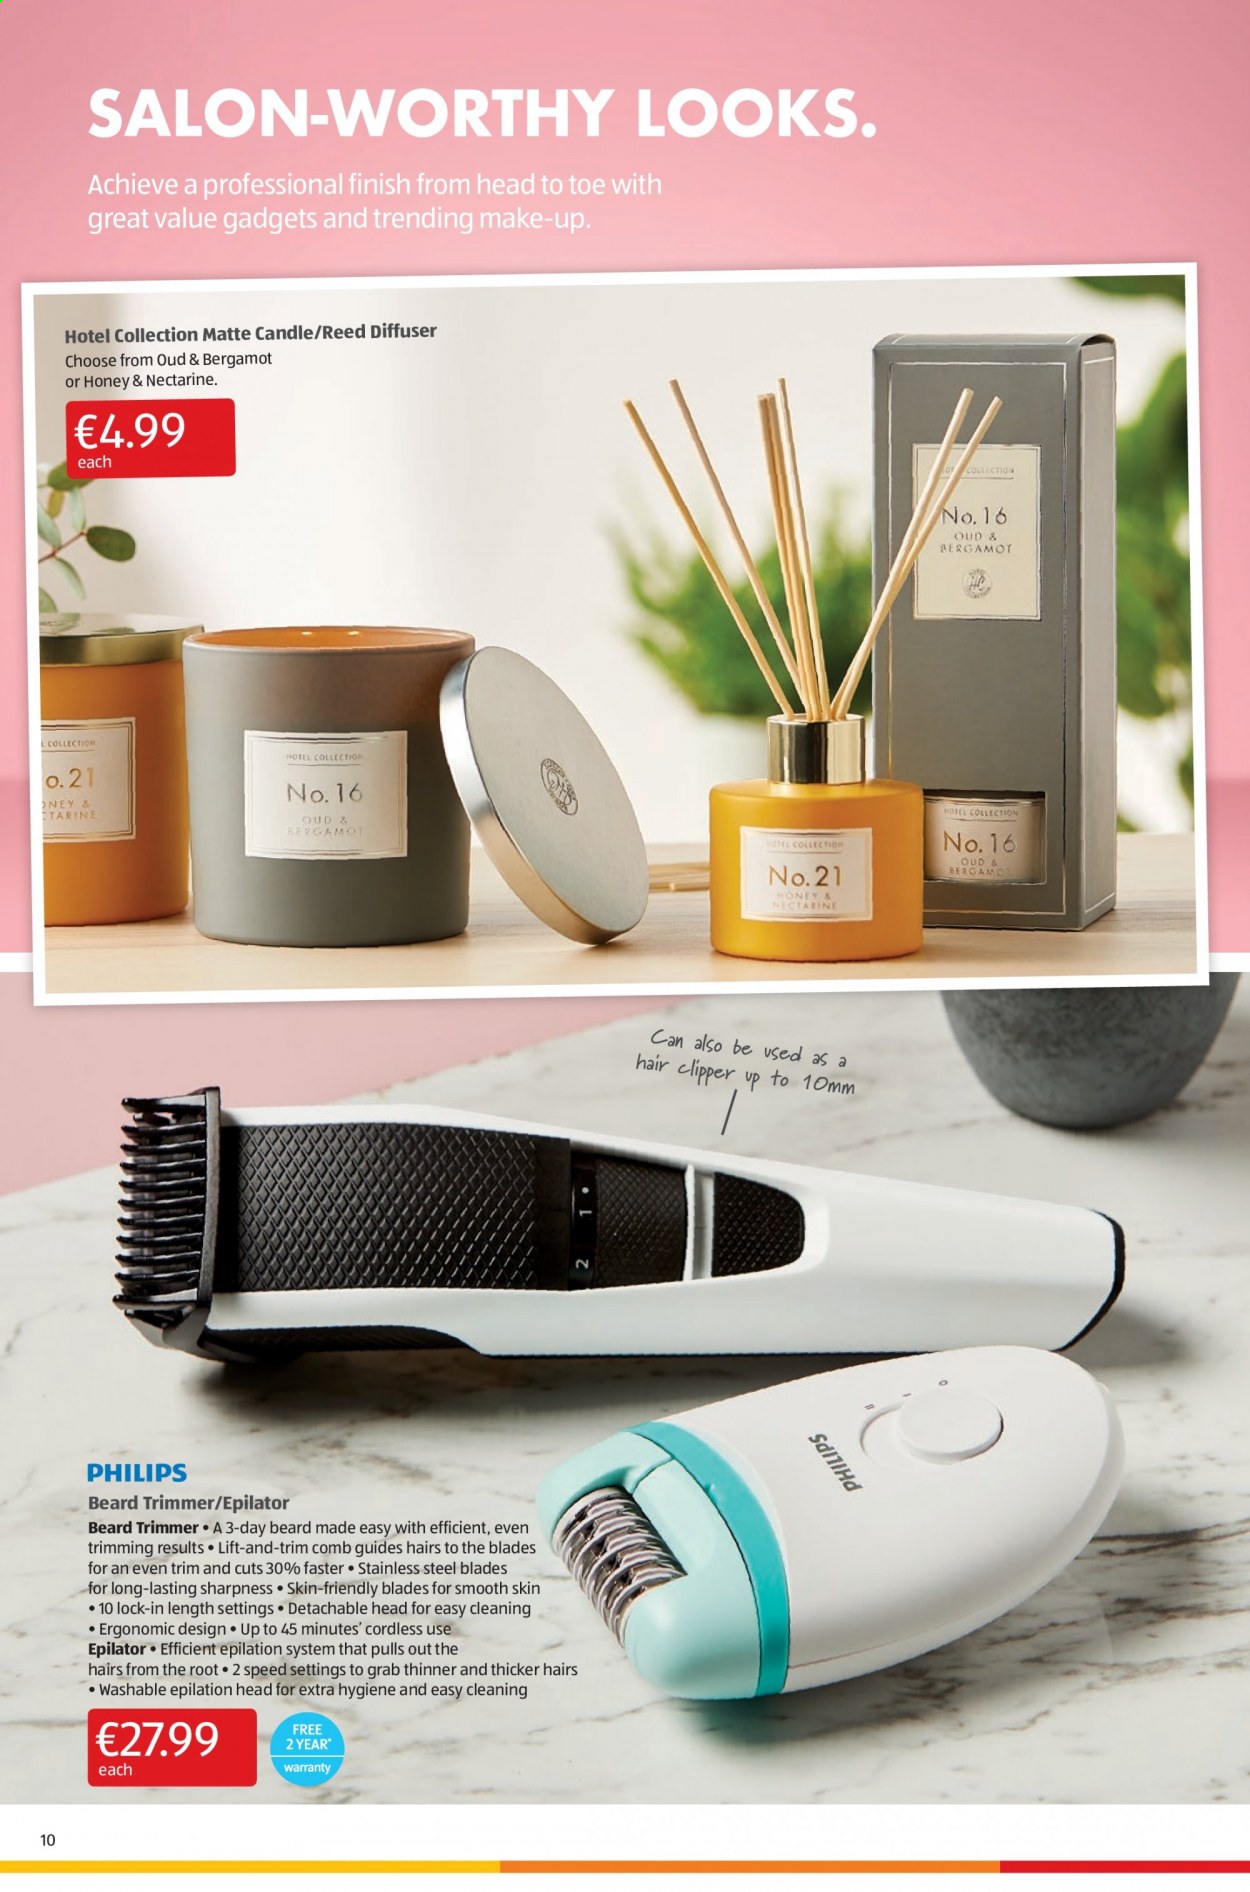 thumbnail - Aldi offer  - 05.08.2021 - 11.08.2021 - Sales products - Philips, nectarines, oil, comb, trimmer, candle, diffuser, epilator, hair clipper, makeup. Page 10.